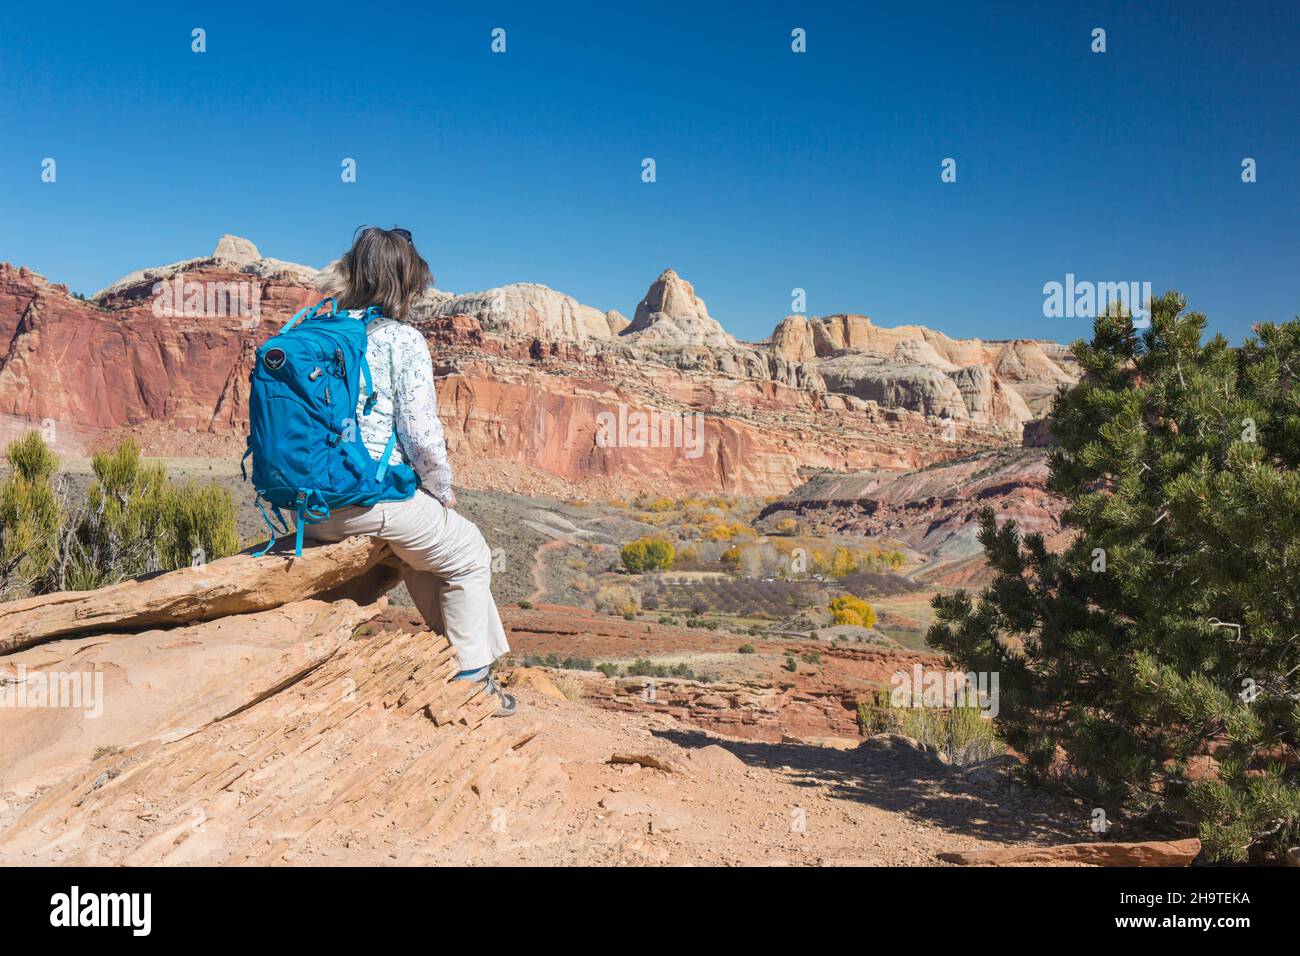 Fruita, Capitol Reef National Park, Utah, USA. Hiker on the Fremont River Trail admiring view over the village to the cliffs of the Waterpocket Fold. Stock Photo